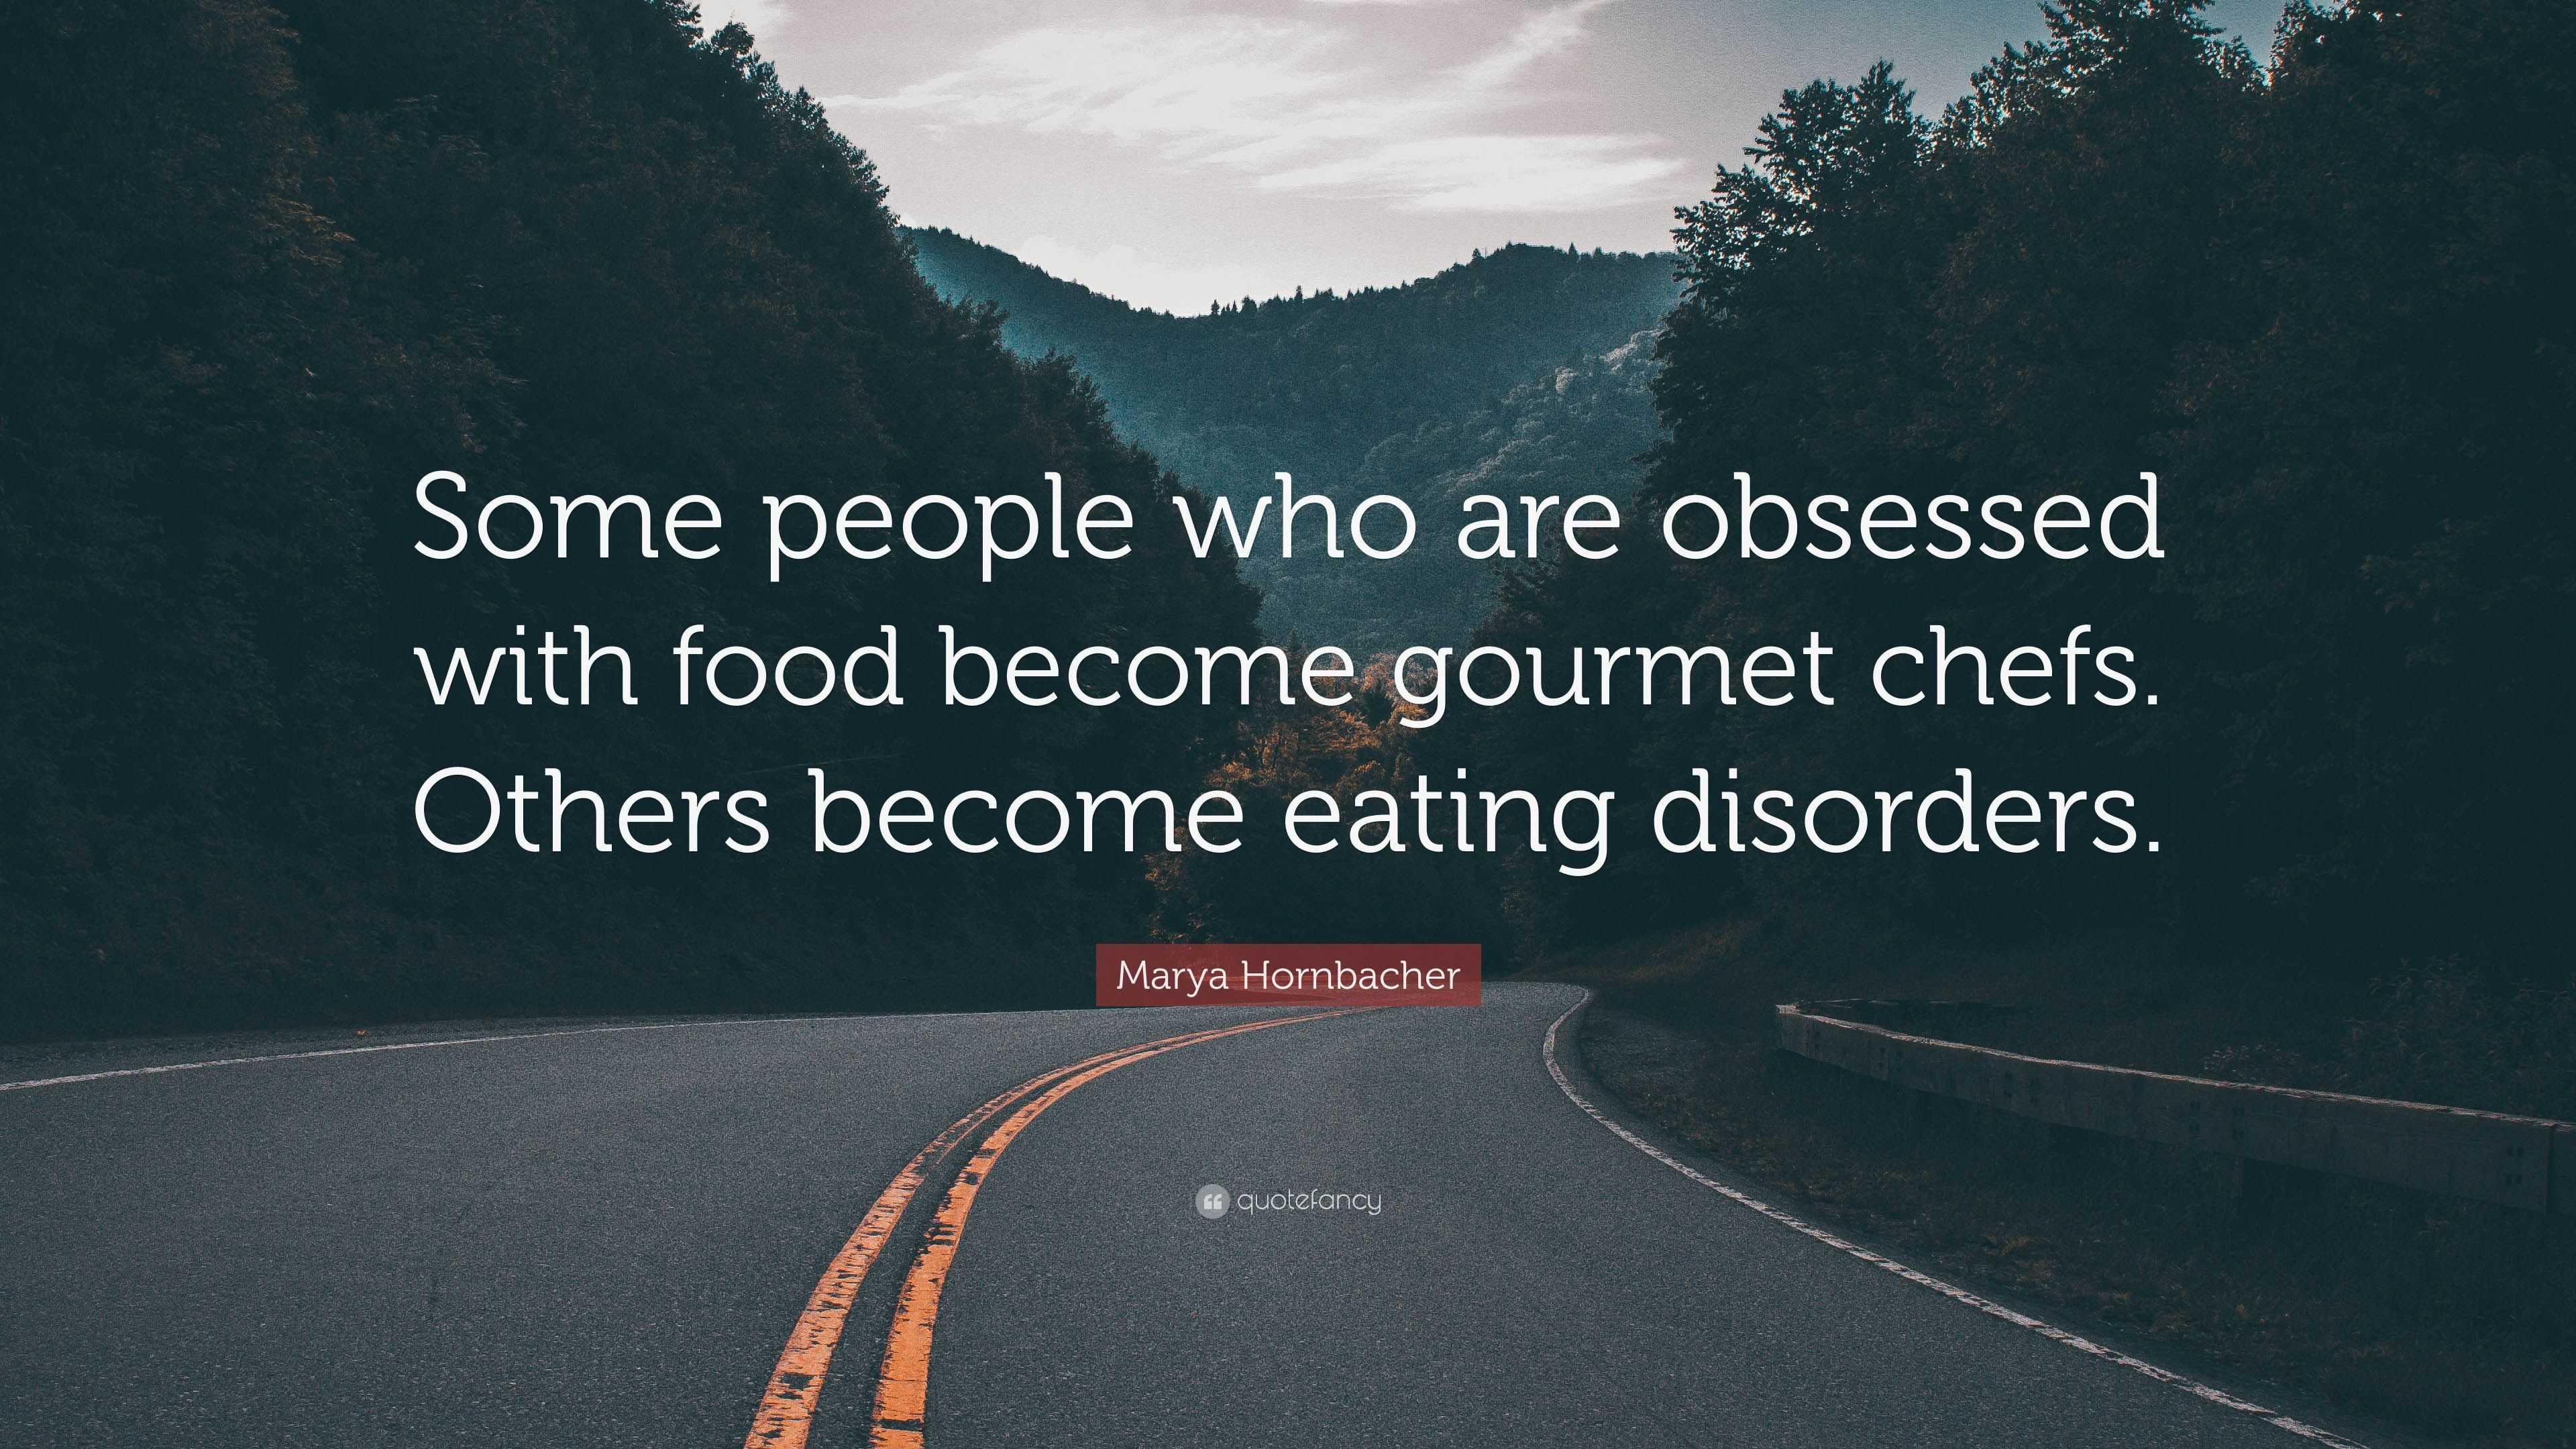 https://quotefancy.com/media/wallpaper/3840x2160/6039563-Marya-Hornbacher-Quote-Some-people-who-are-obsessed-with-food.jpg